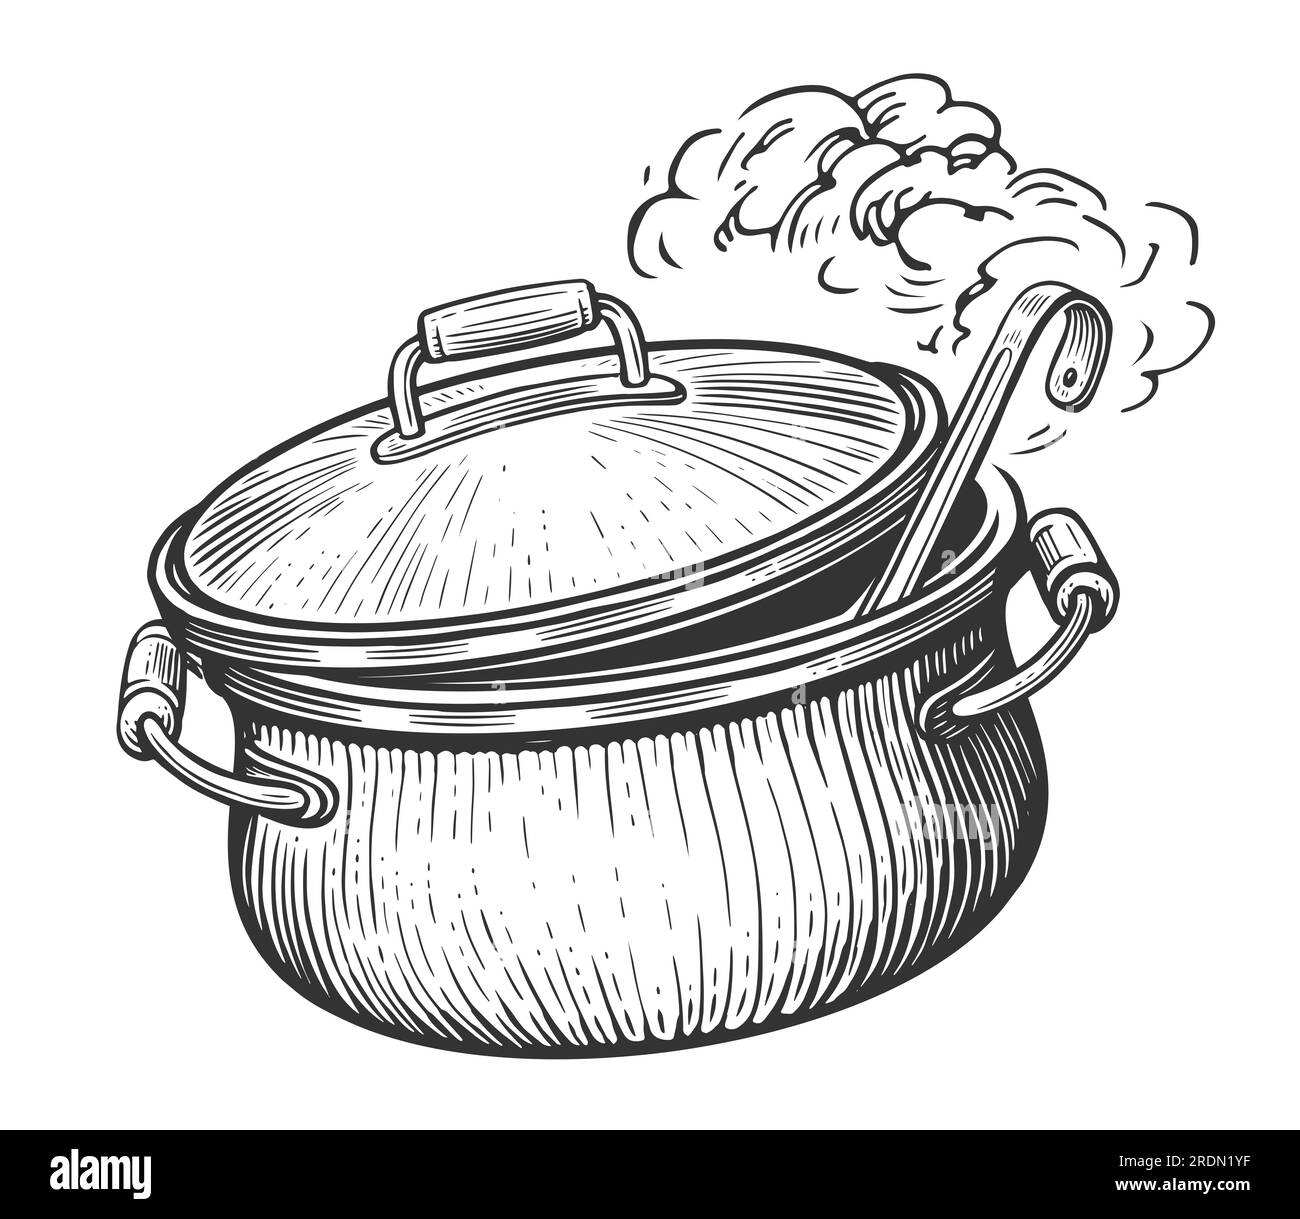 Kitchen pot with lid and ladle. Cooking food. Sketch illustration vintage engraving style Stock Photo